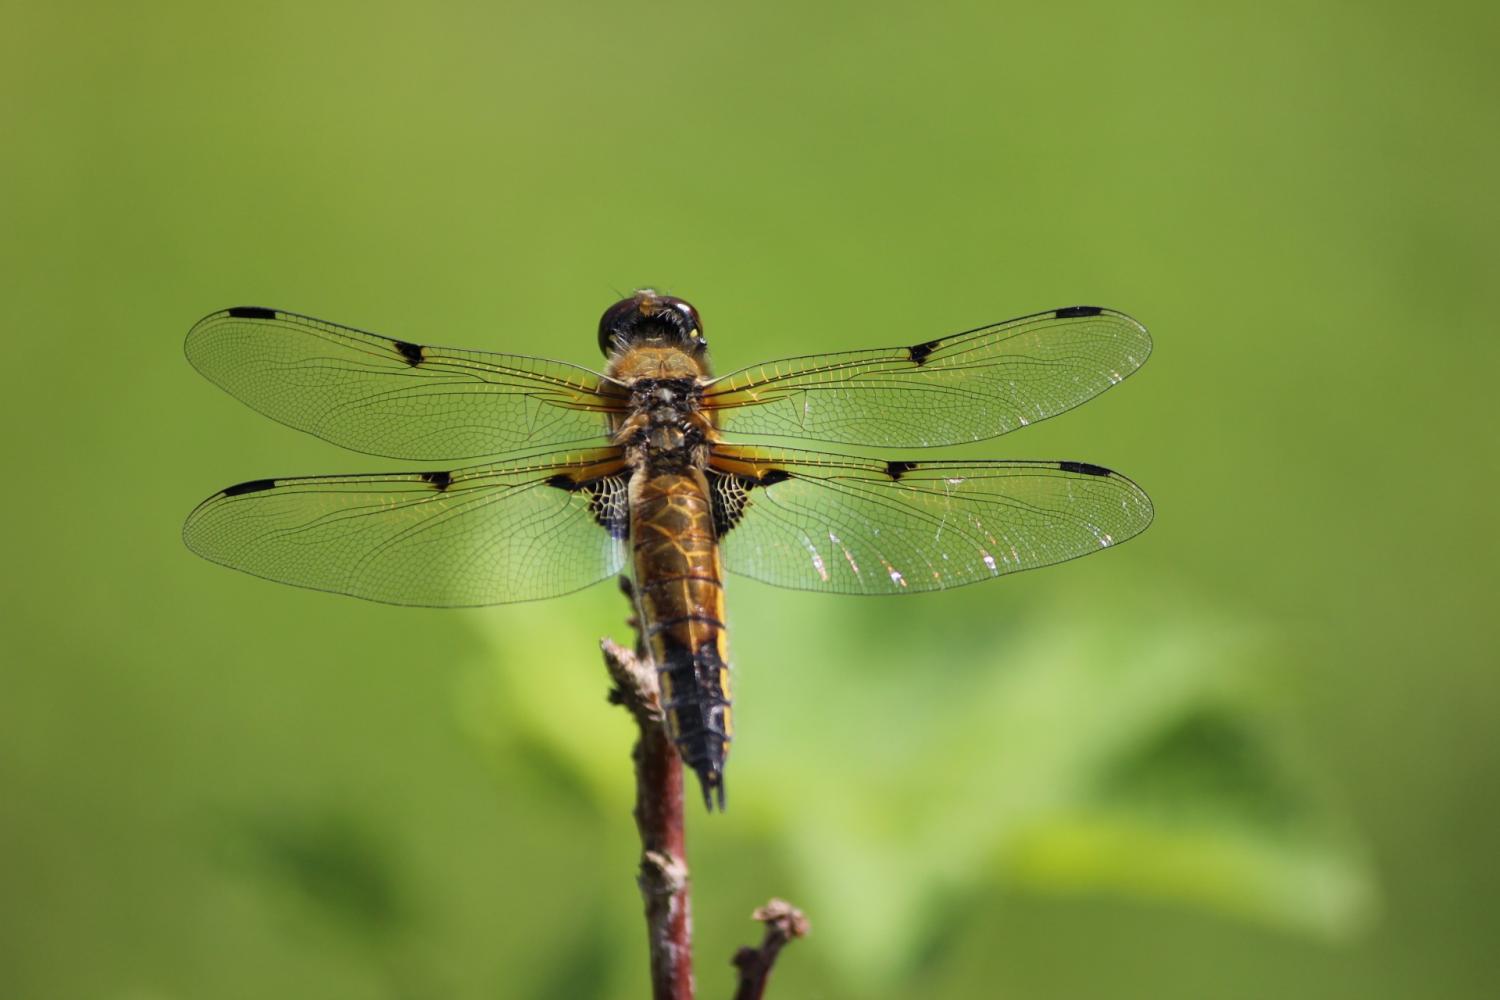 Male dragonflies lose their 'bling' in hotter climates